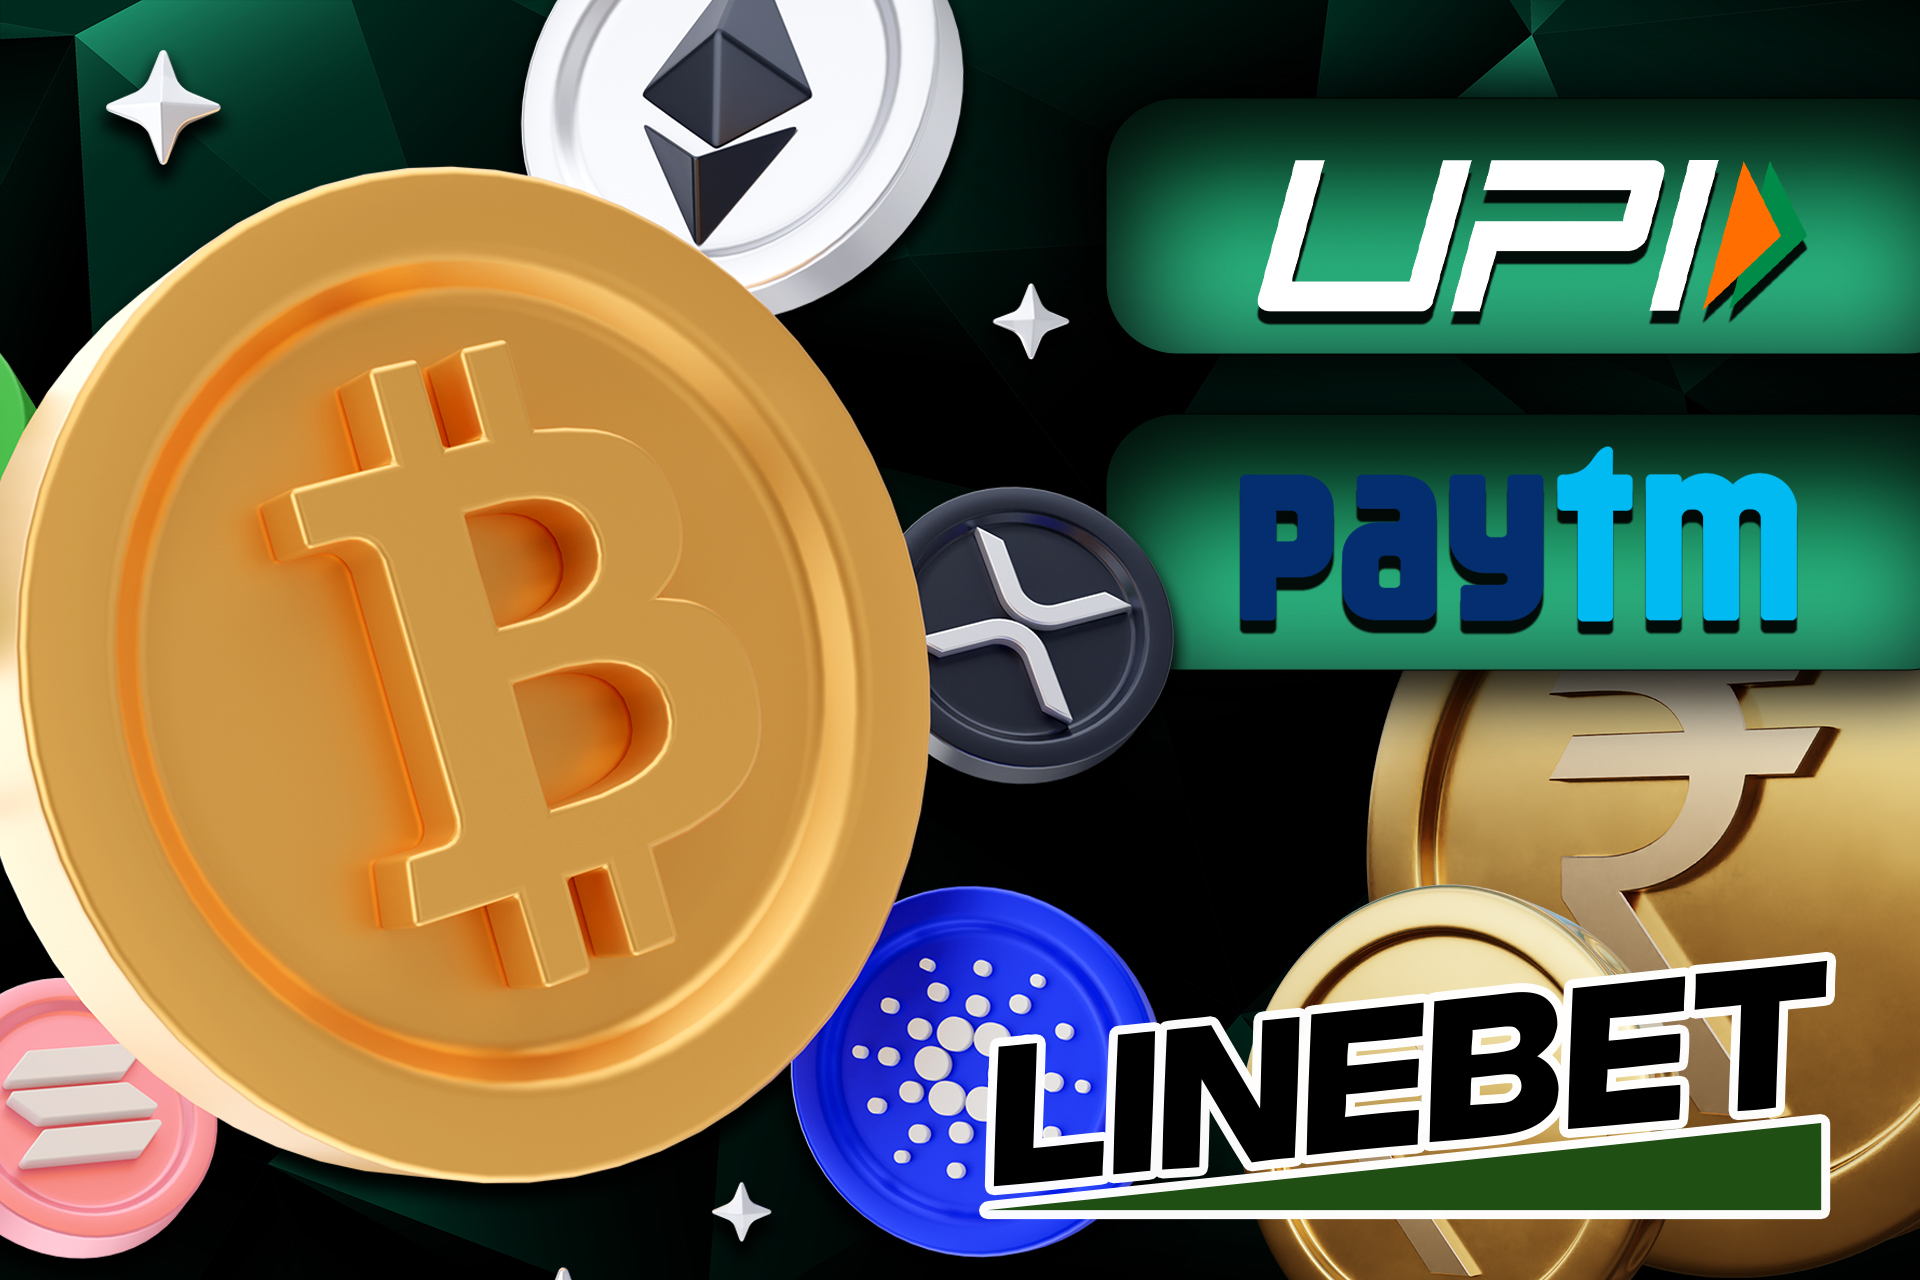 Besides, Linebet allows depositing in various cryptocurrencies.